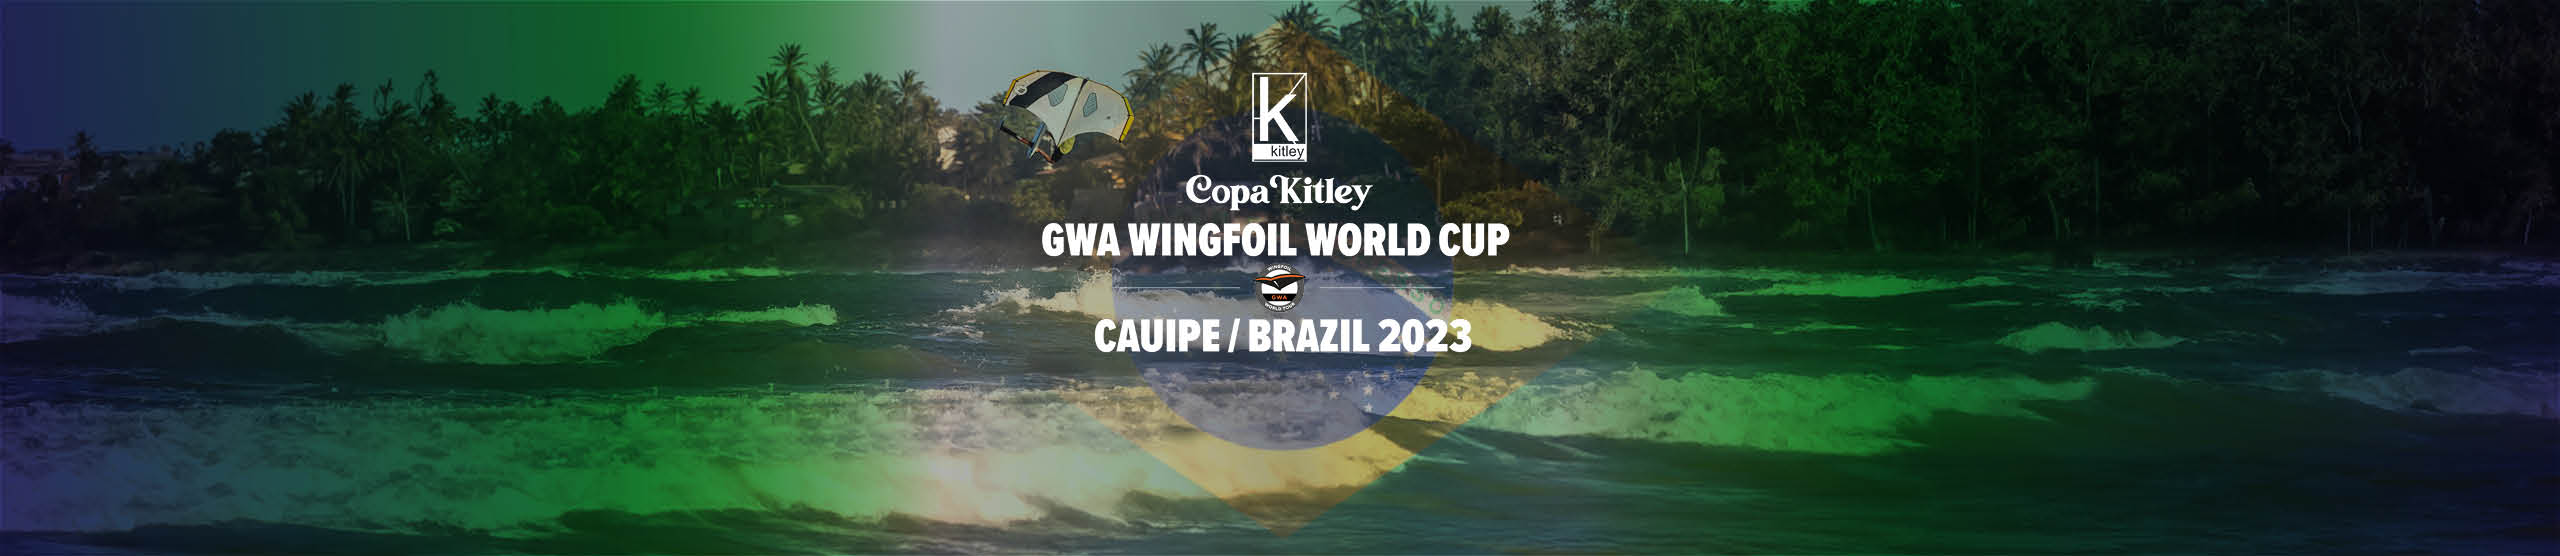 Image for GWA Wingfoil World Cup Brazil 2023